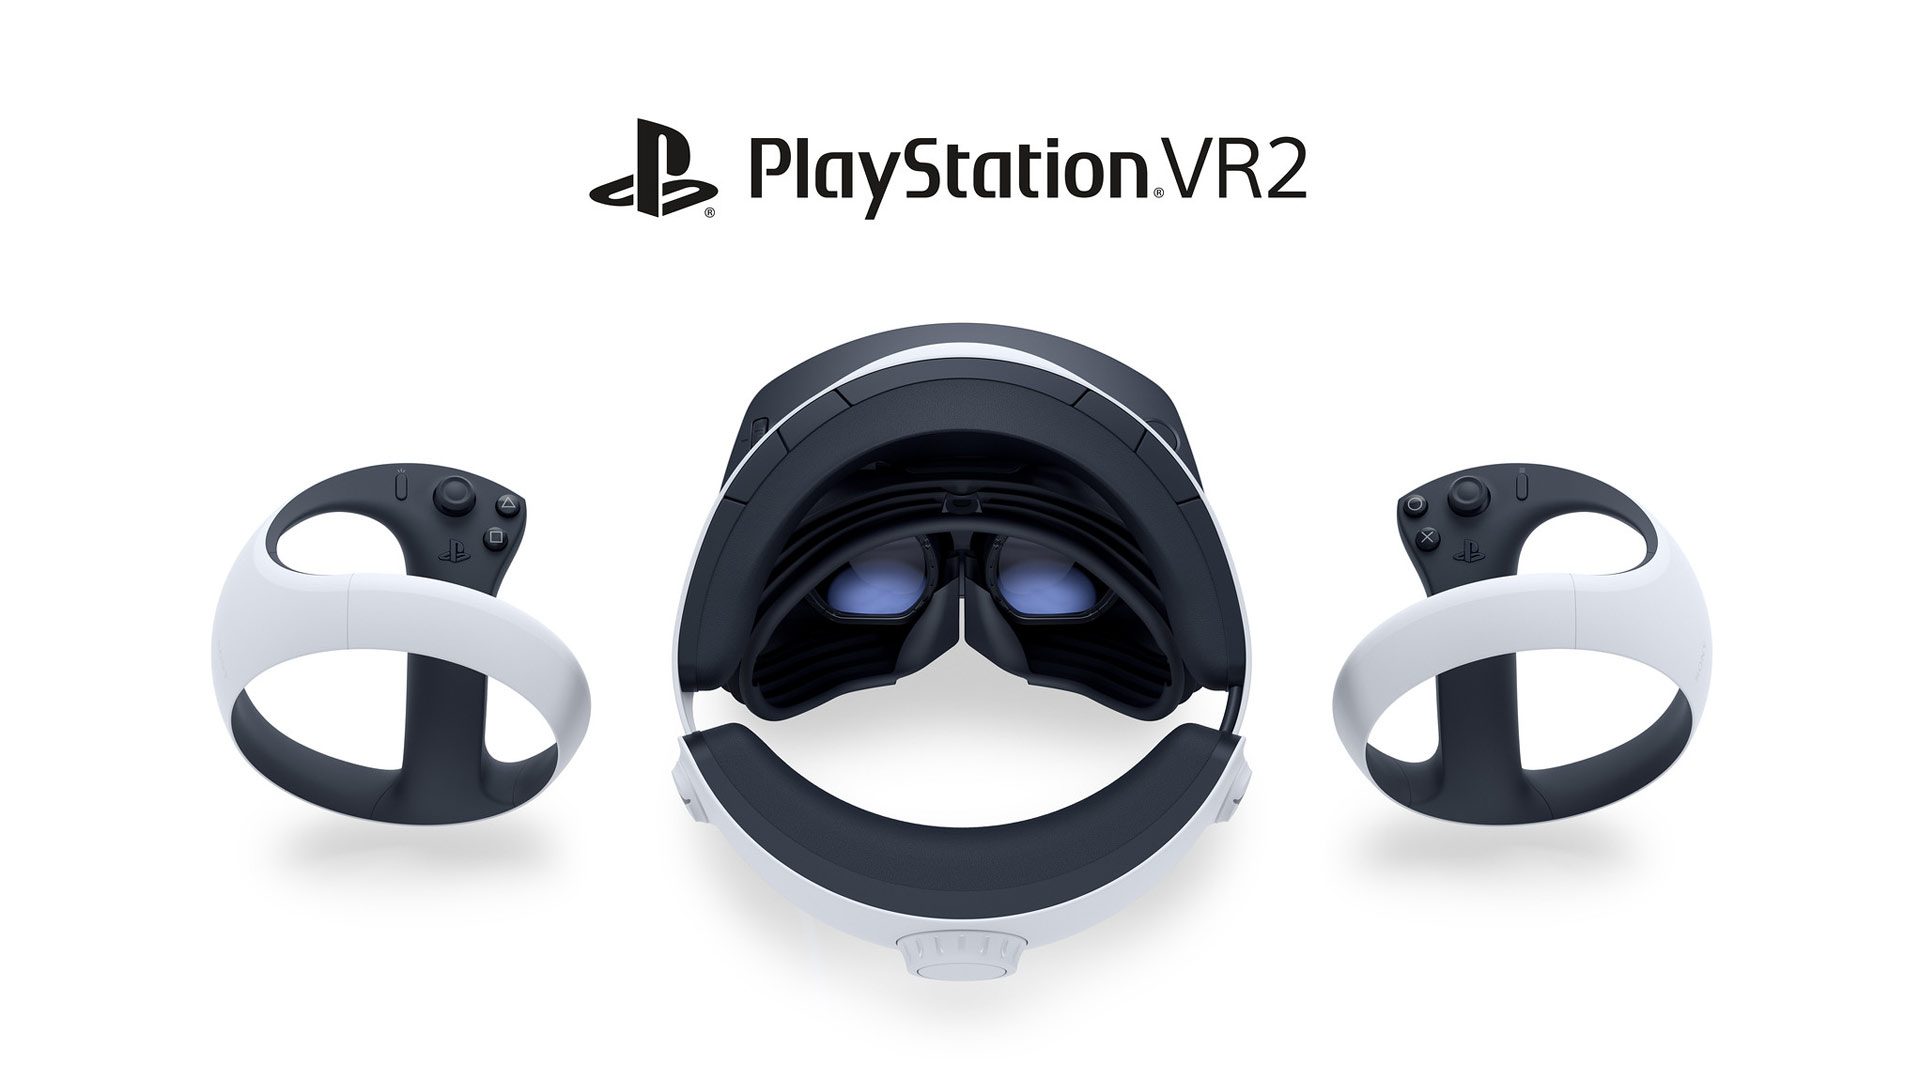 PlayStation VR2 will eventually be compatible with PC, claims